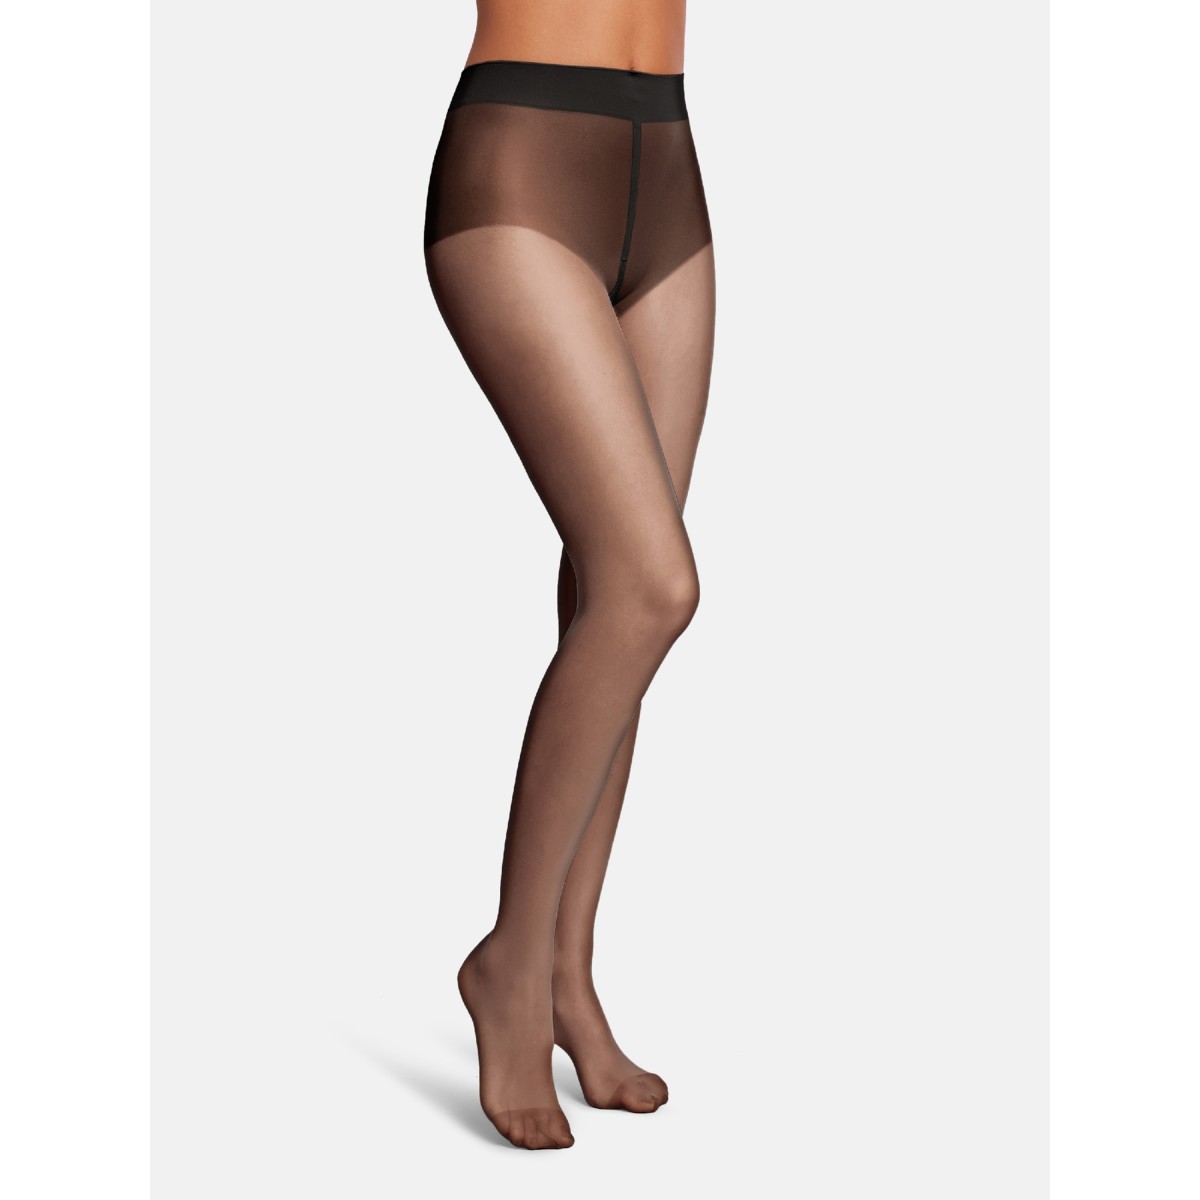 https://drake-store-shop.ch/34709-full_default/wolford-pure-10-tights.jpg